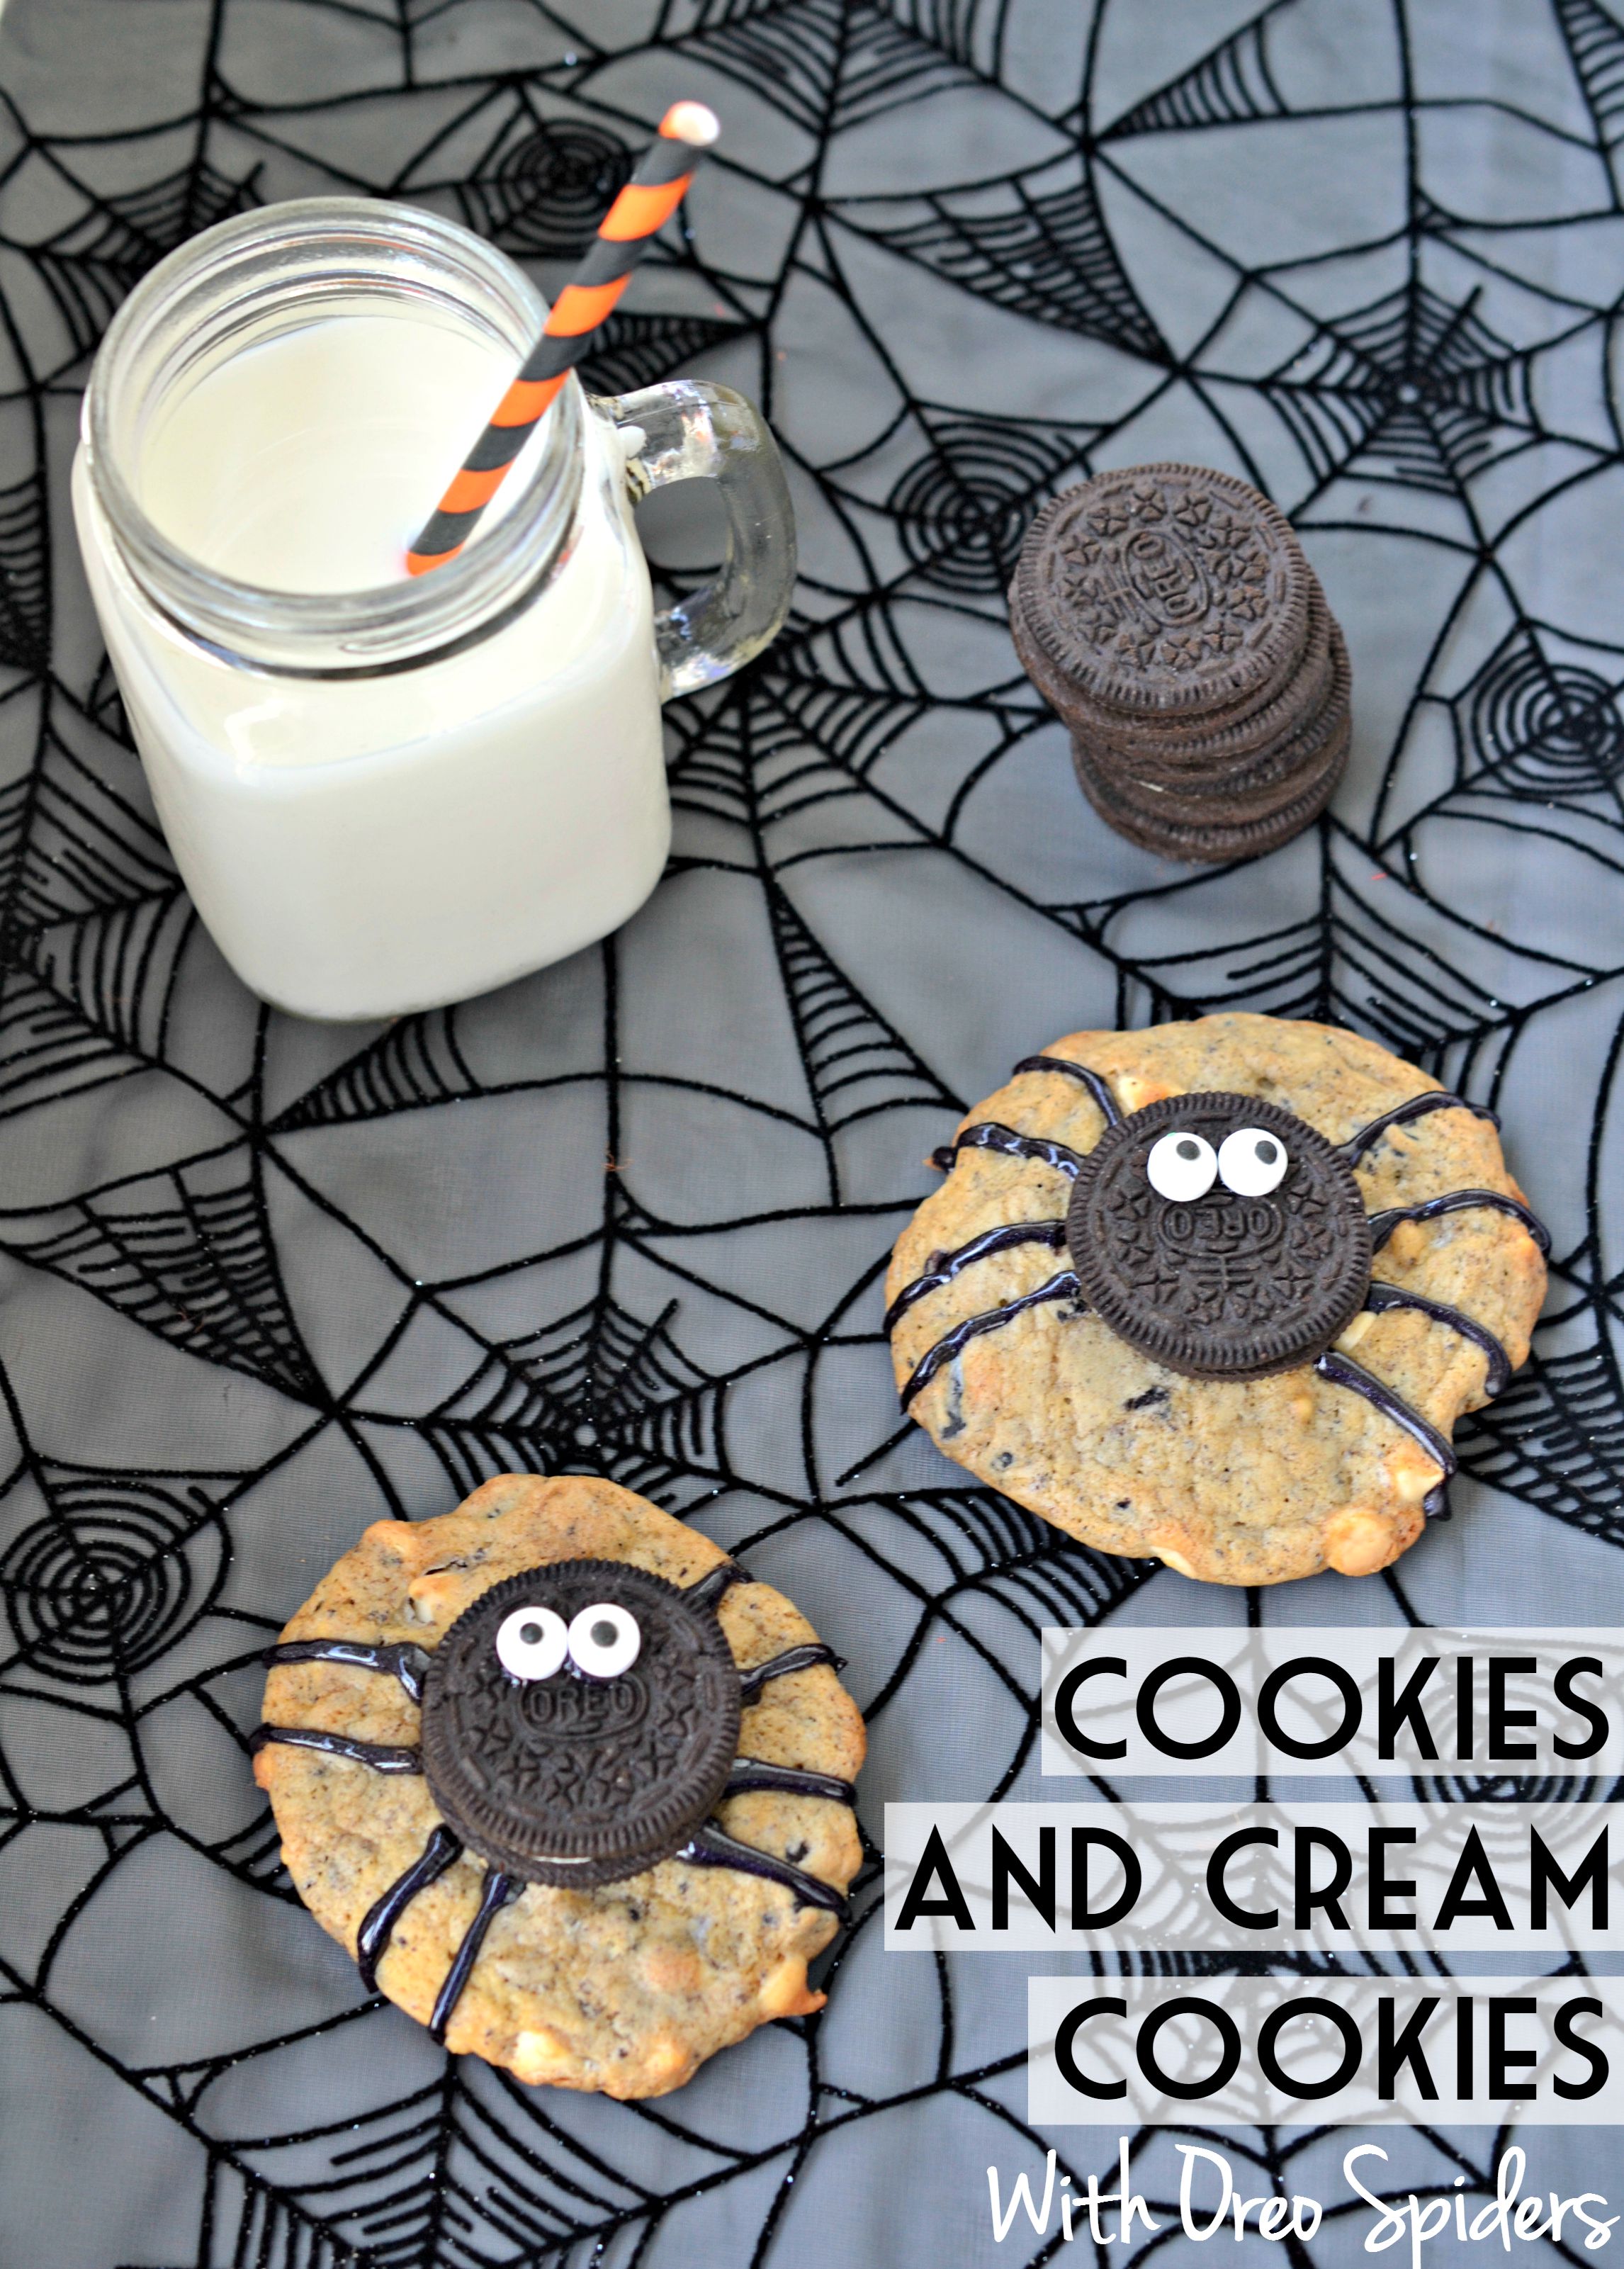 Cookies and Cream Cookies With Oreo Spiders - Halloween Cookie Recipe